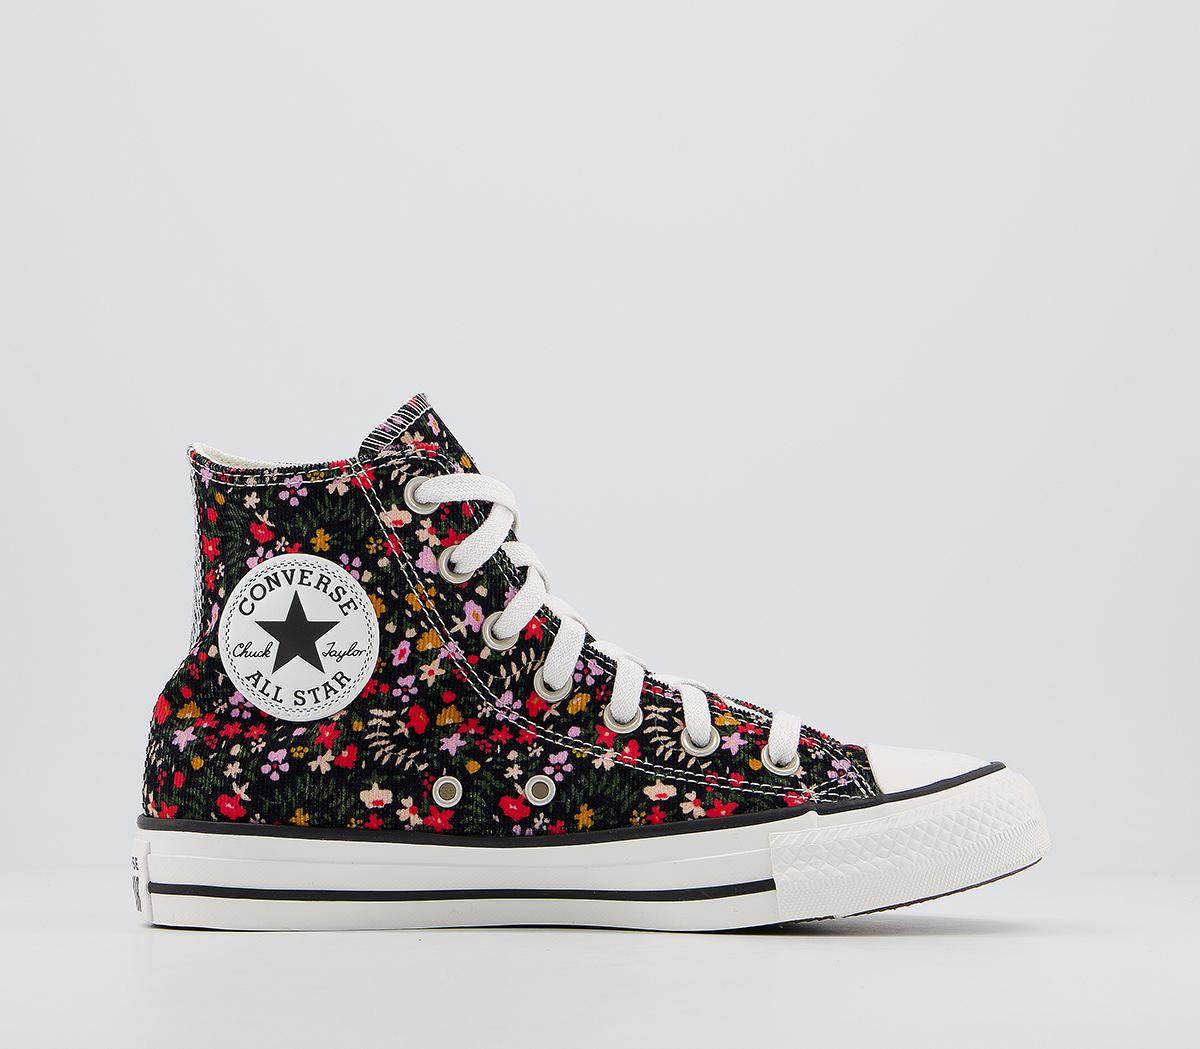 Converse Converse All Star Hi Trainers Black Floral - Women's Trainers